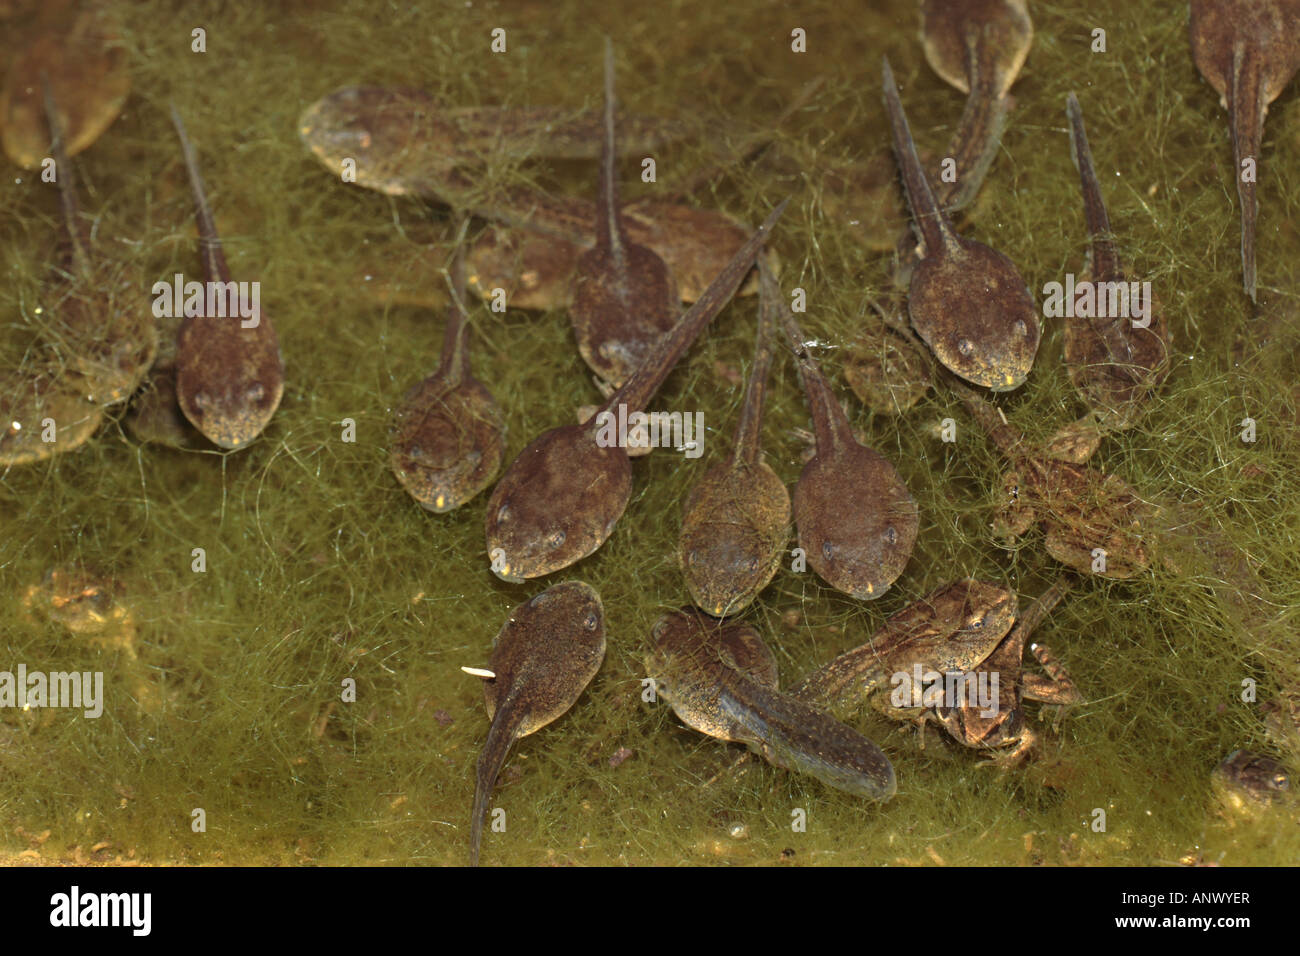 common frog, grass frog (Rana temporaria), pollywogs and young frogs in a pond, Germany, Bavaria Stock Photo